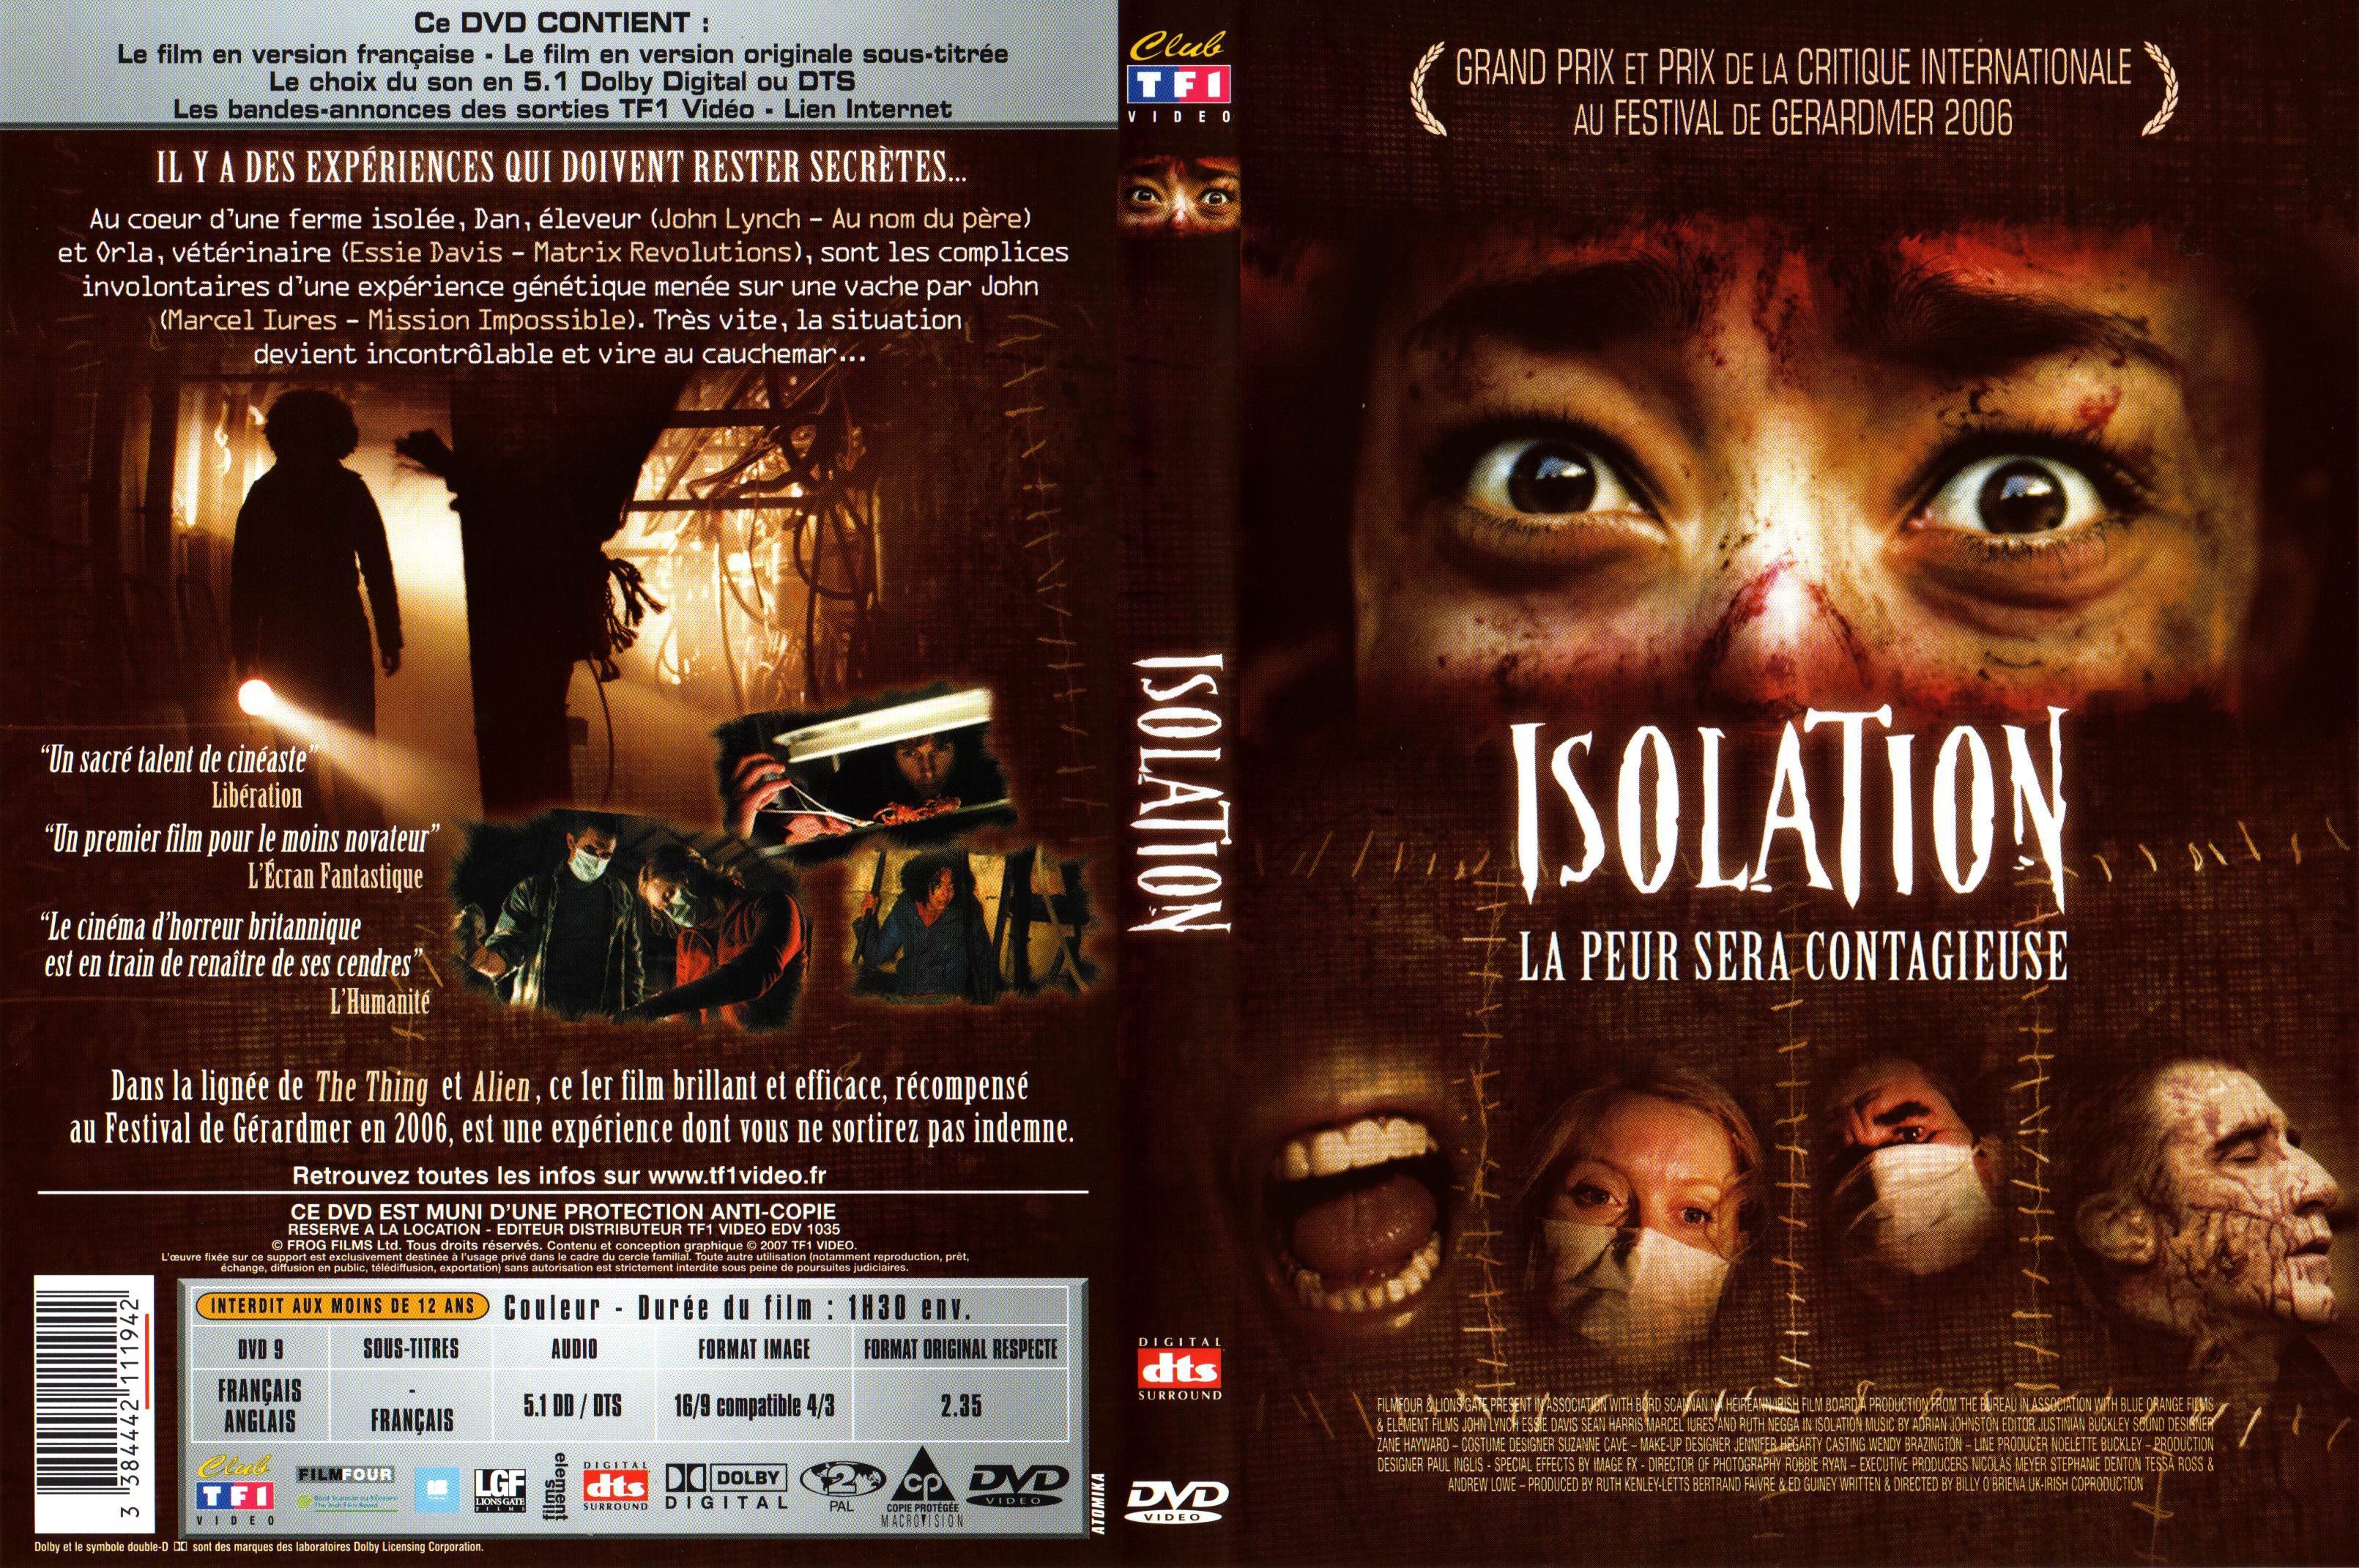 Jaquette DVD Isolation